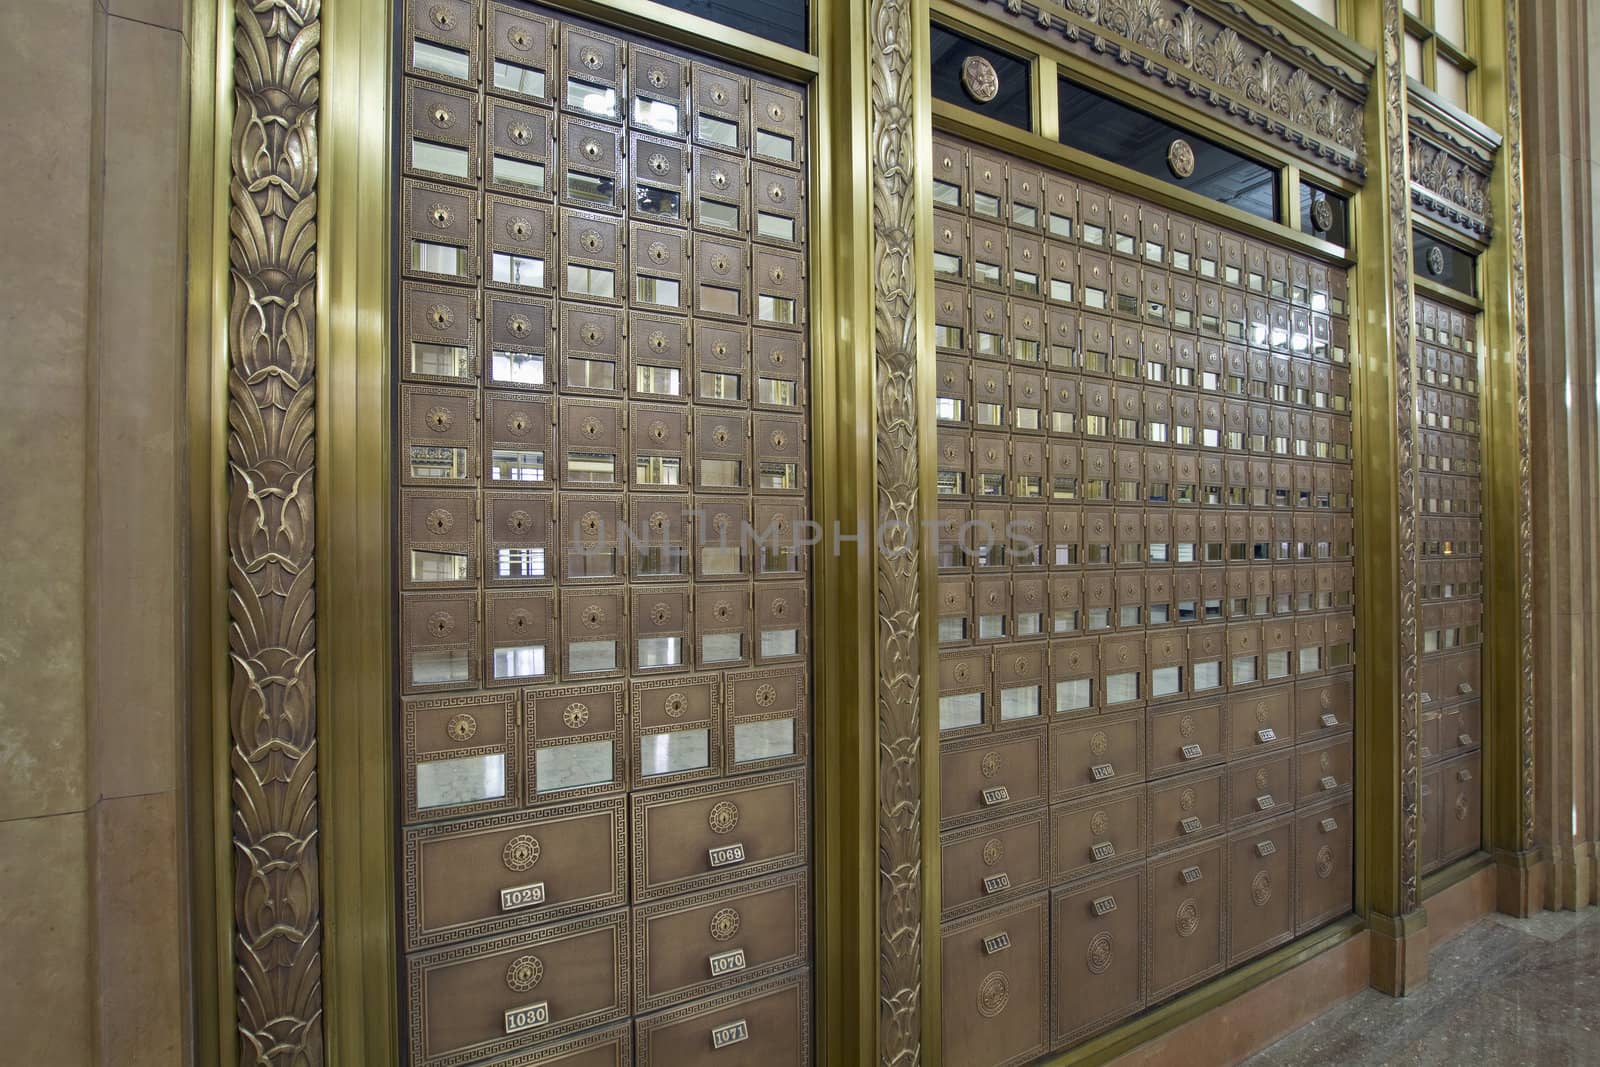 Antique Post Office Boxes 3 by Davidgn